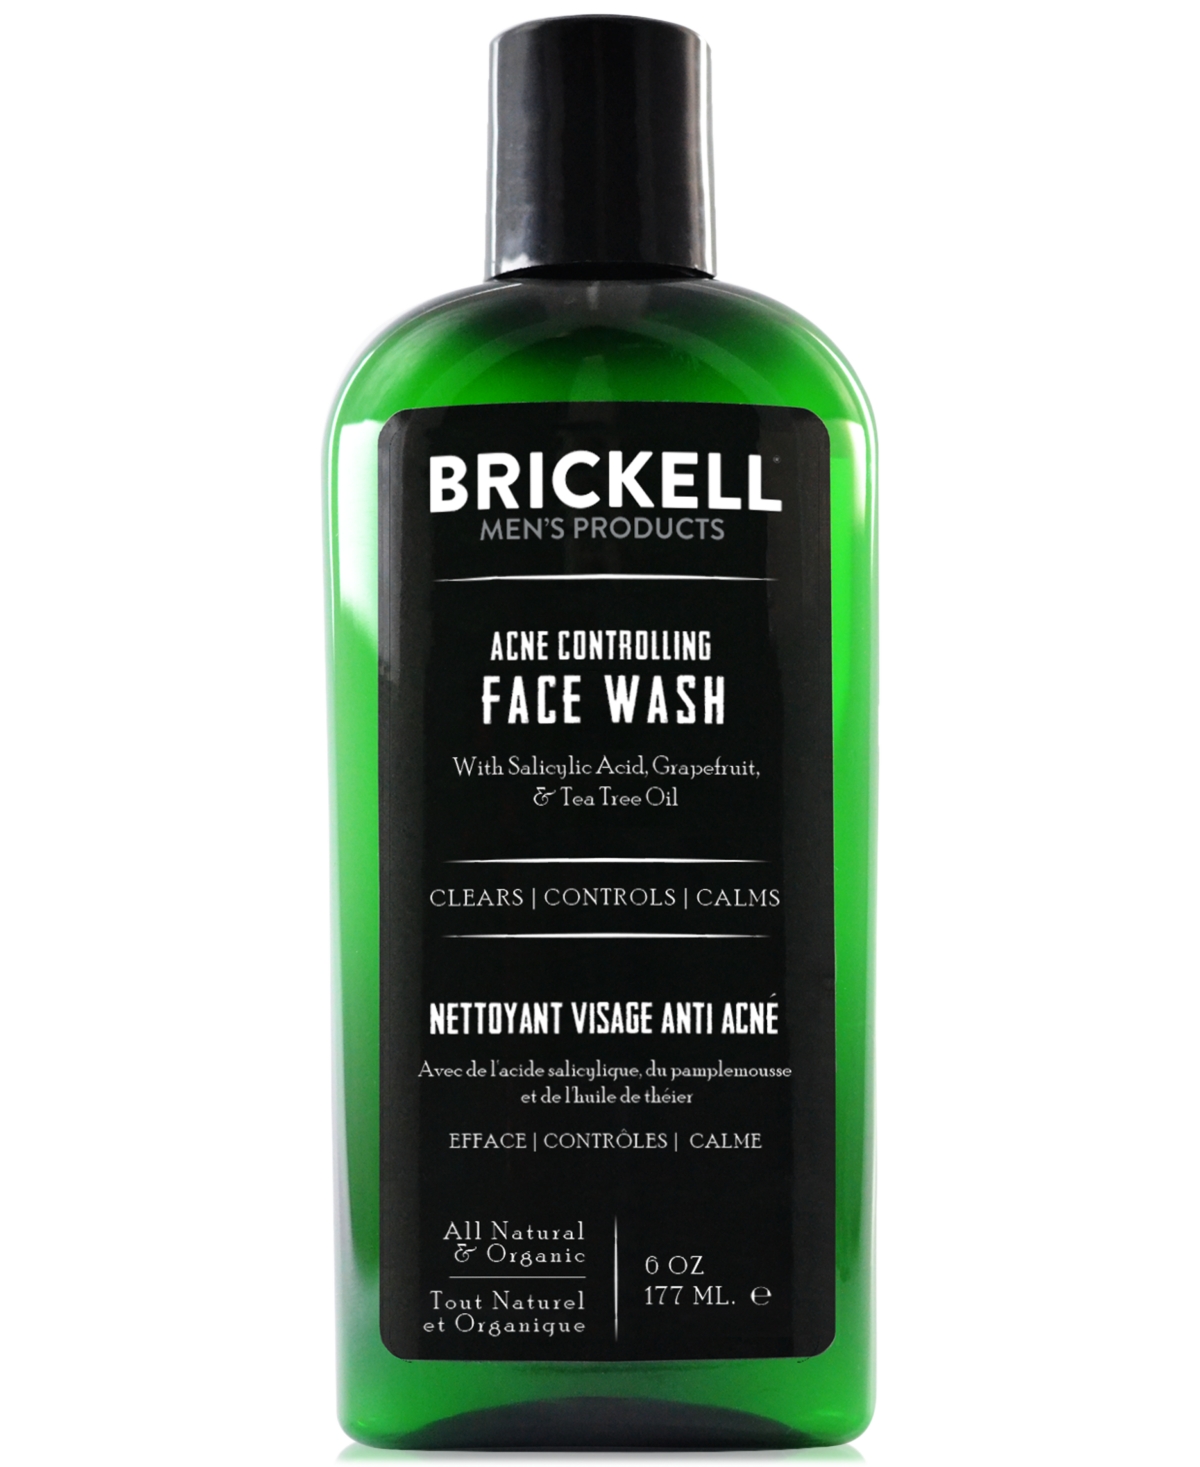 Brickell Mens Products Brickell Men's Products Acne Controlling Face Wash, 6 Oz.